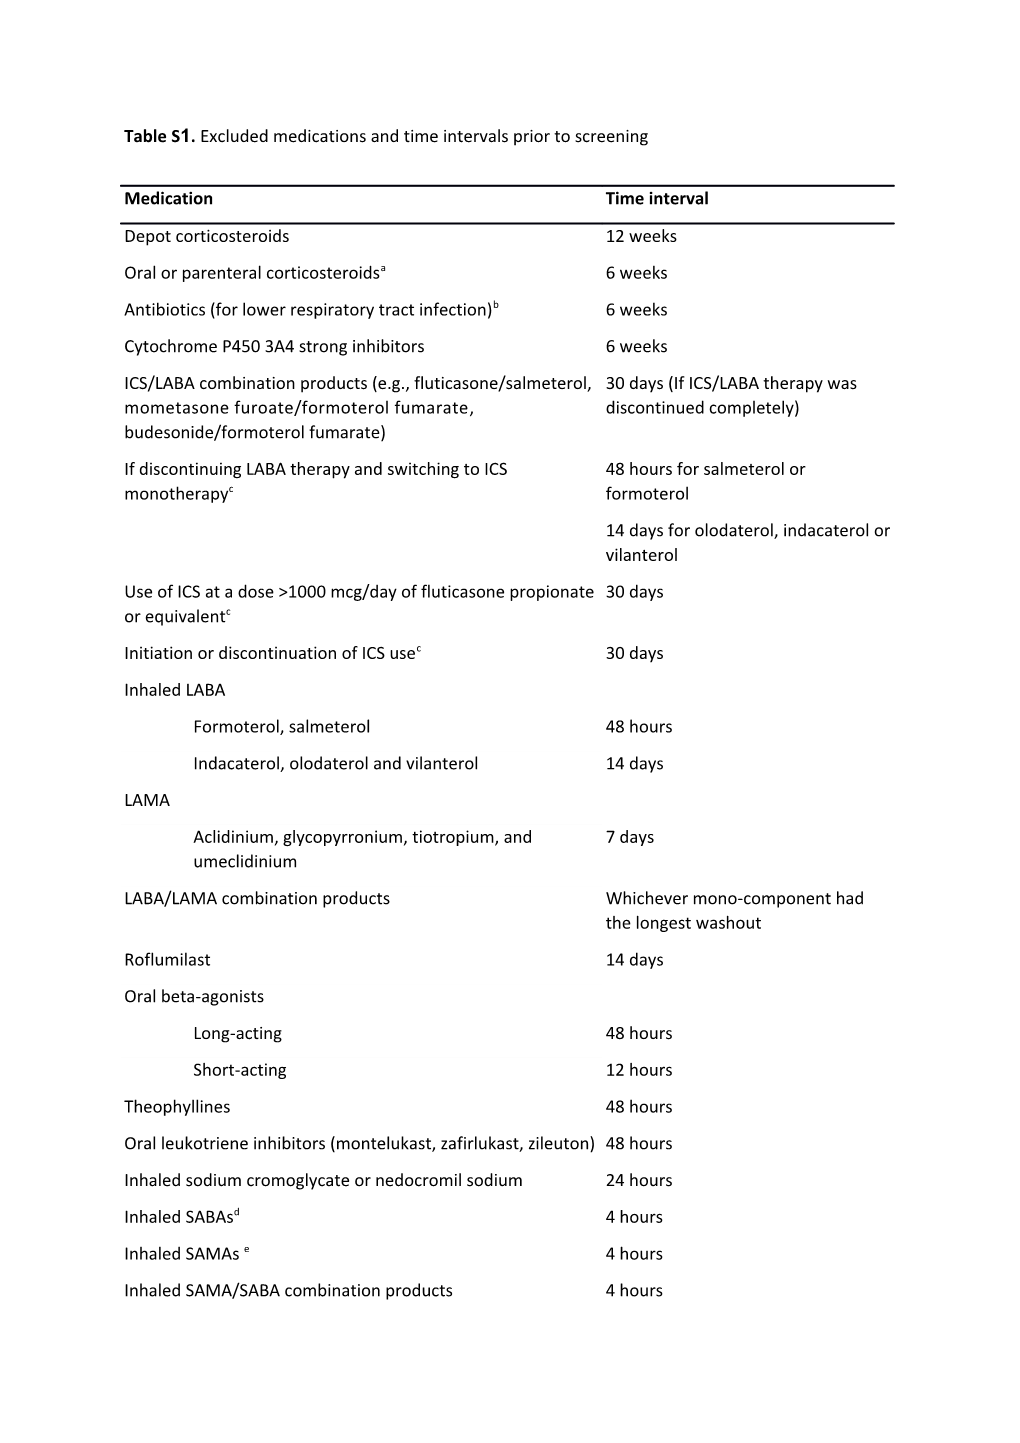 Table S1. Excluded Medications and Time Intervals Prior to Screening